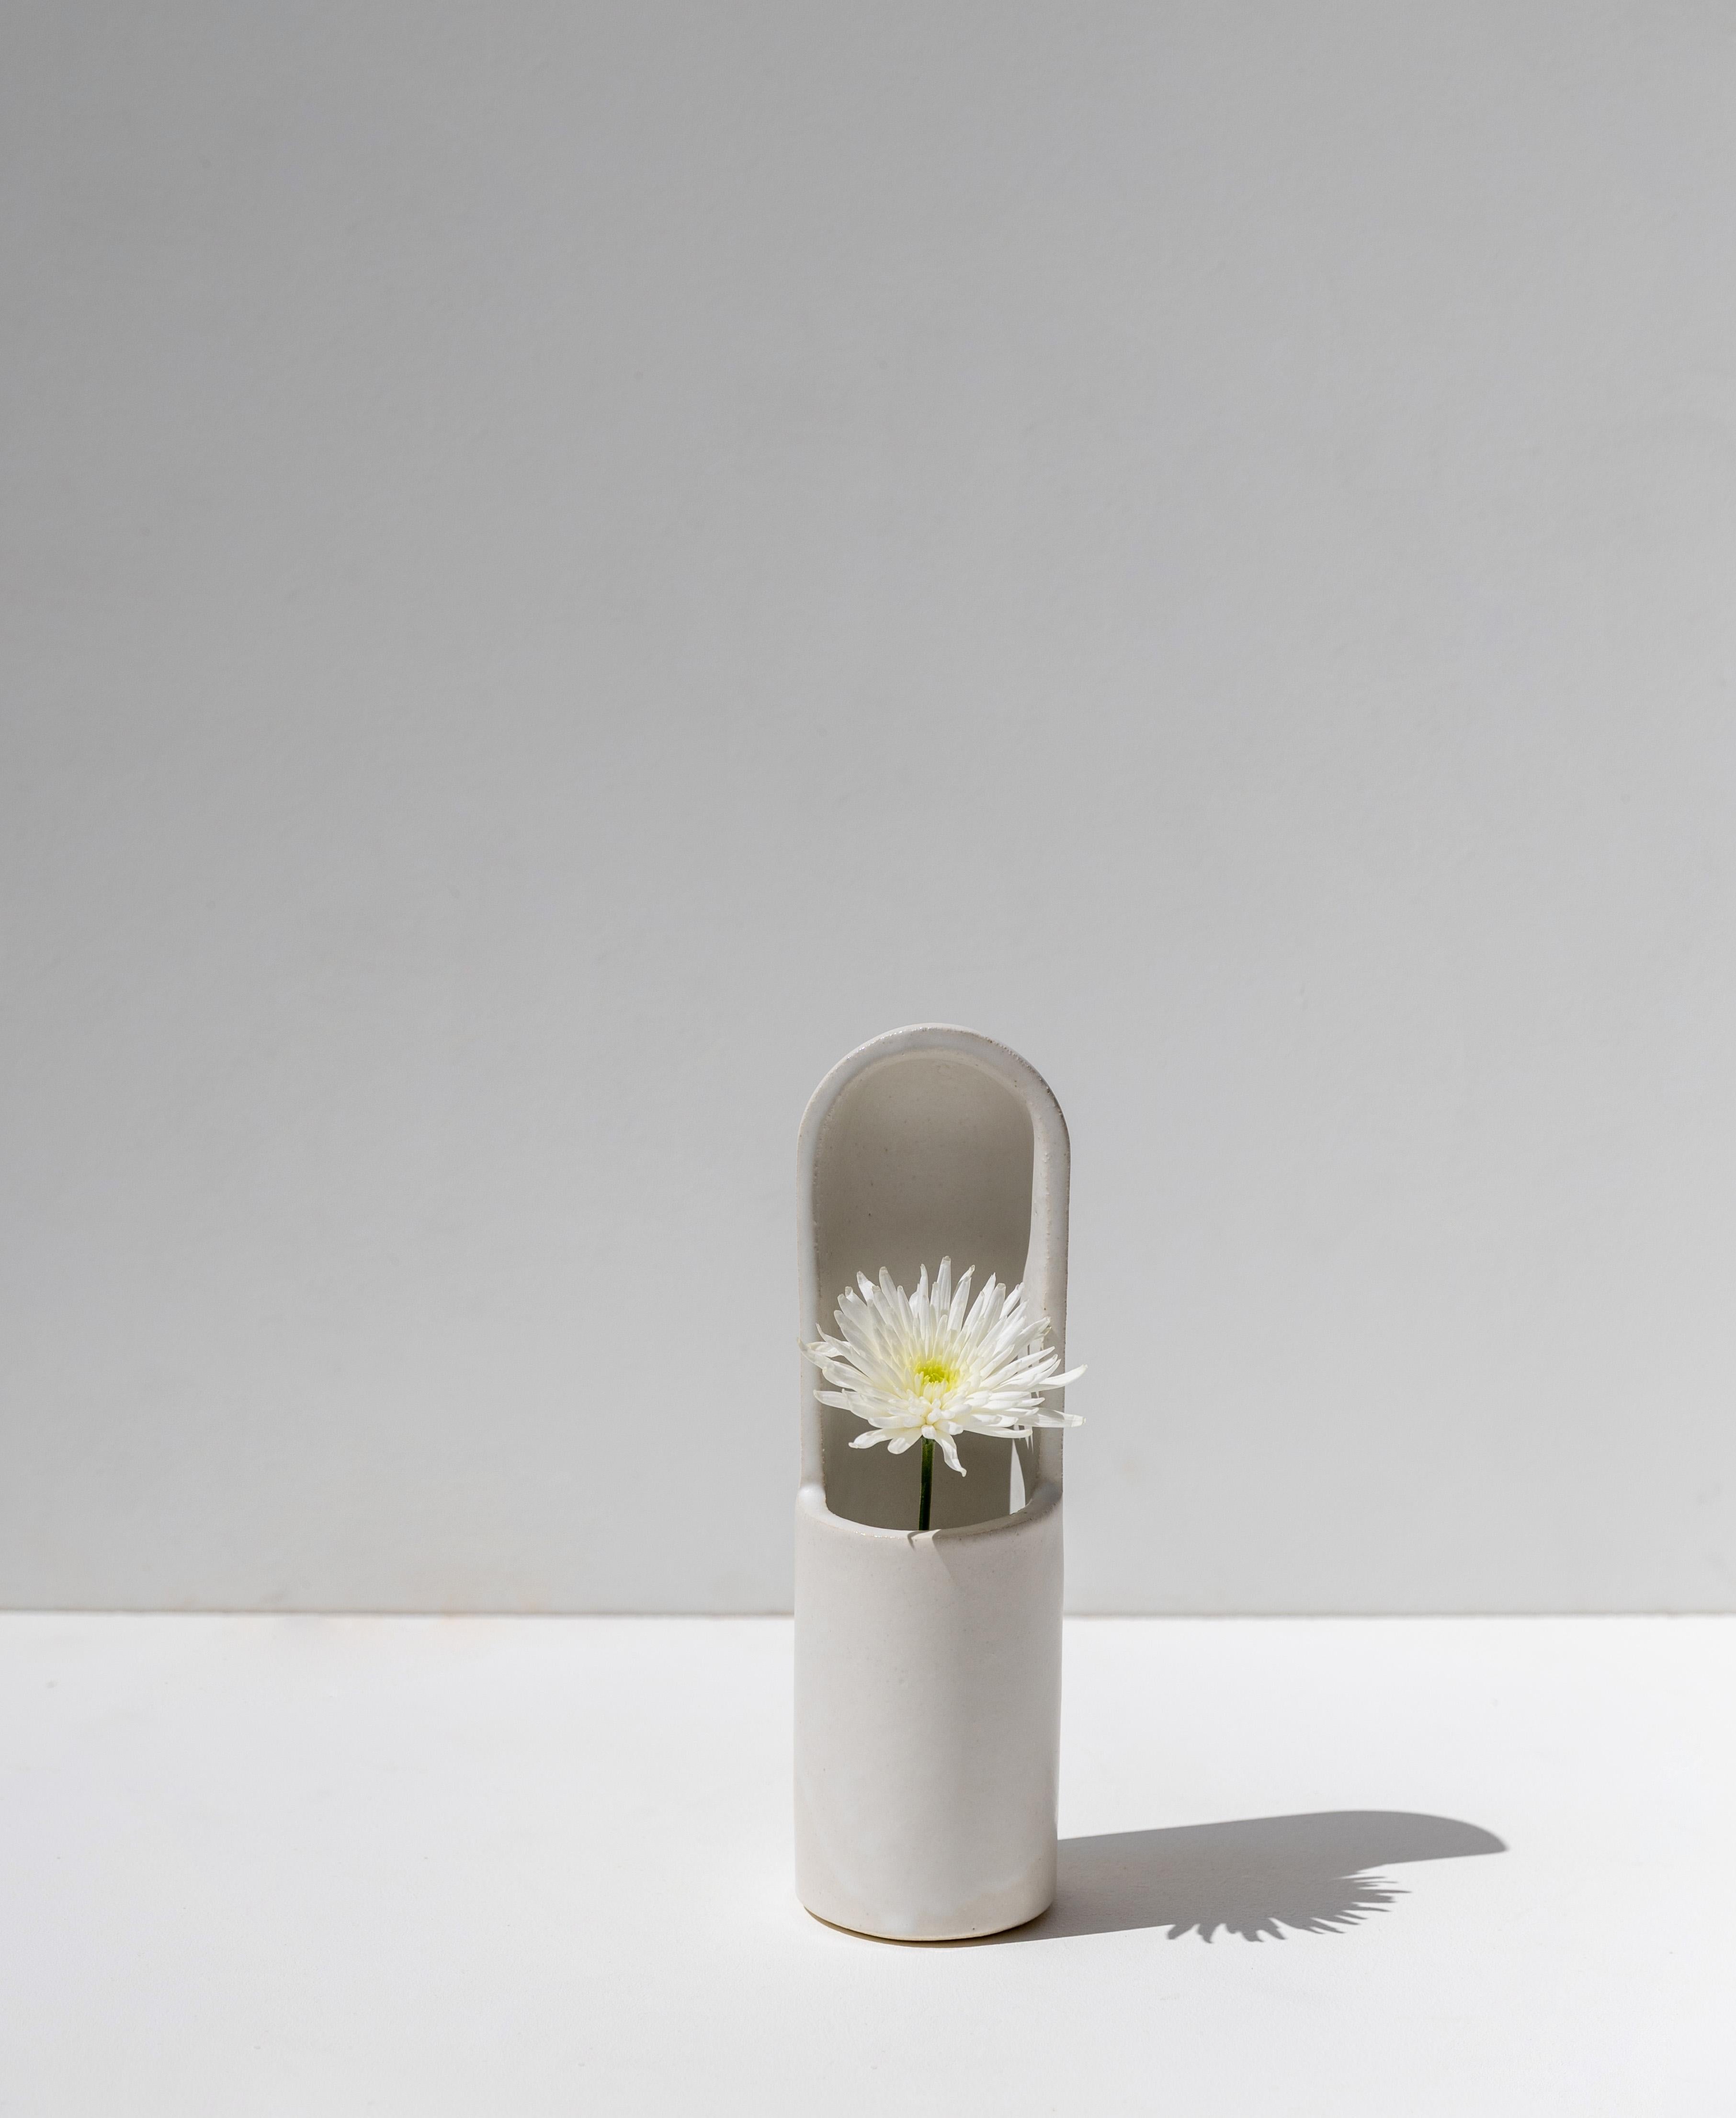 Kyrtos Vase by Lisa Allegra
Dimensions: Ø 8 x H 27 cm.
Materials: Ceramic.
Also available in Blackened gold and Pearl finishes. Please contact us.

Born in 1986 in Paris, Lisa Allegra has earned in 2010 a degree in furniture design from the École